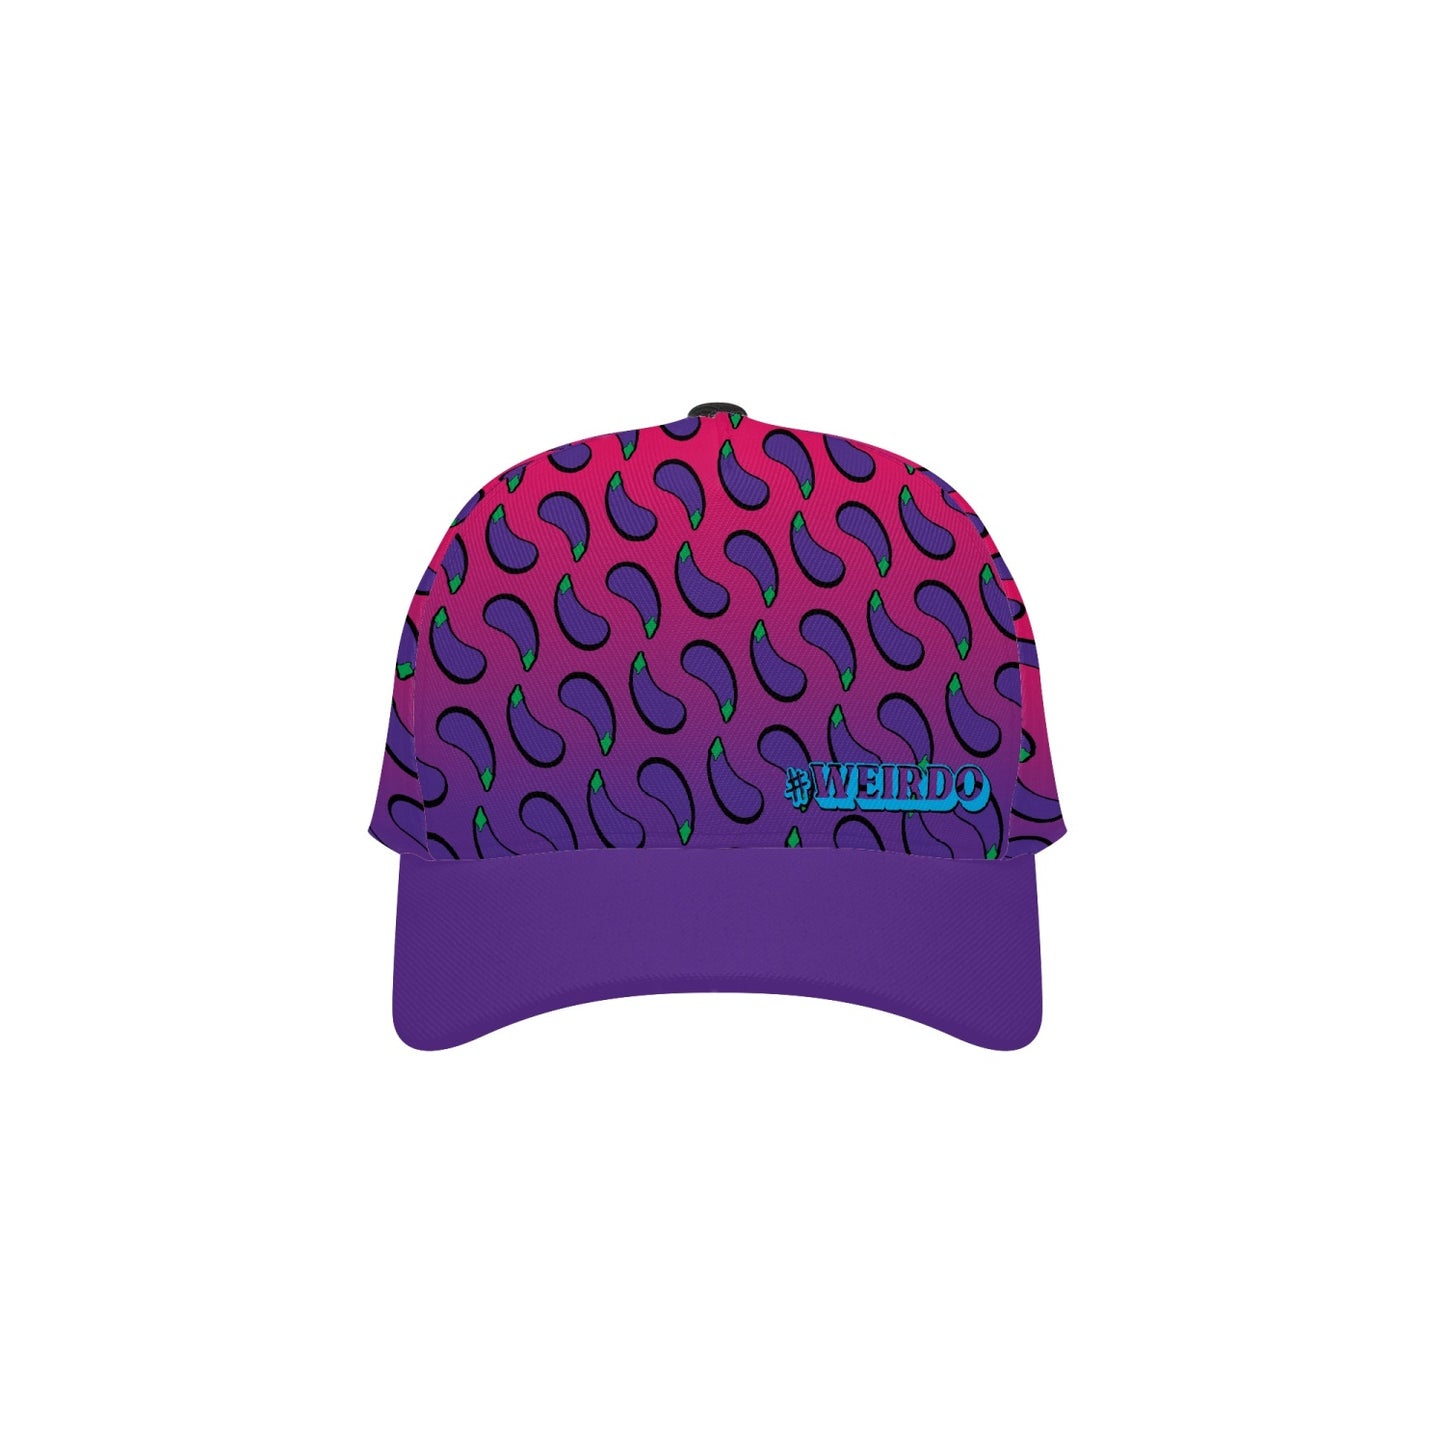 #WEIRDO | Only a weirdo will wear this baseball cap! Purple and pink colored with our logo at the front: #WEIRDO.